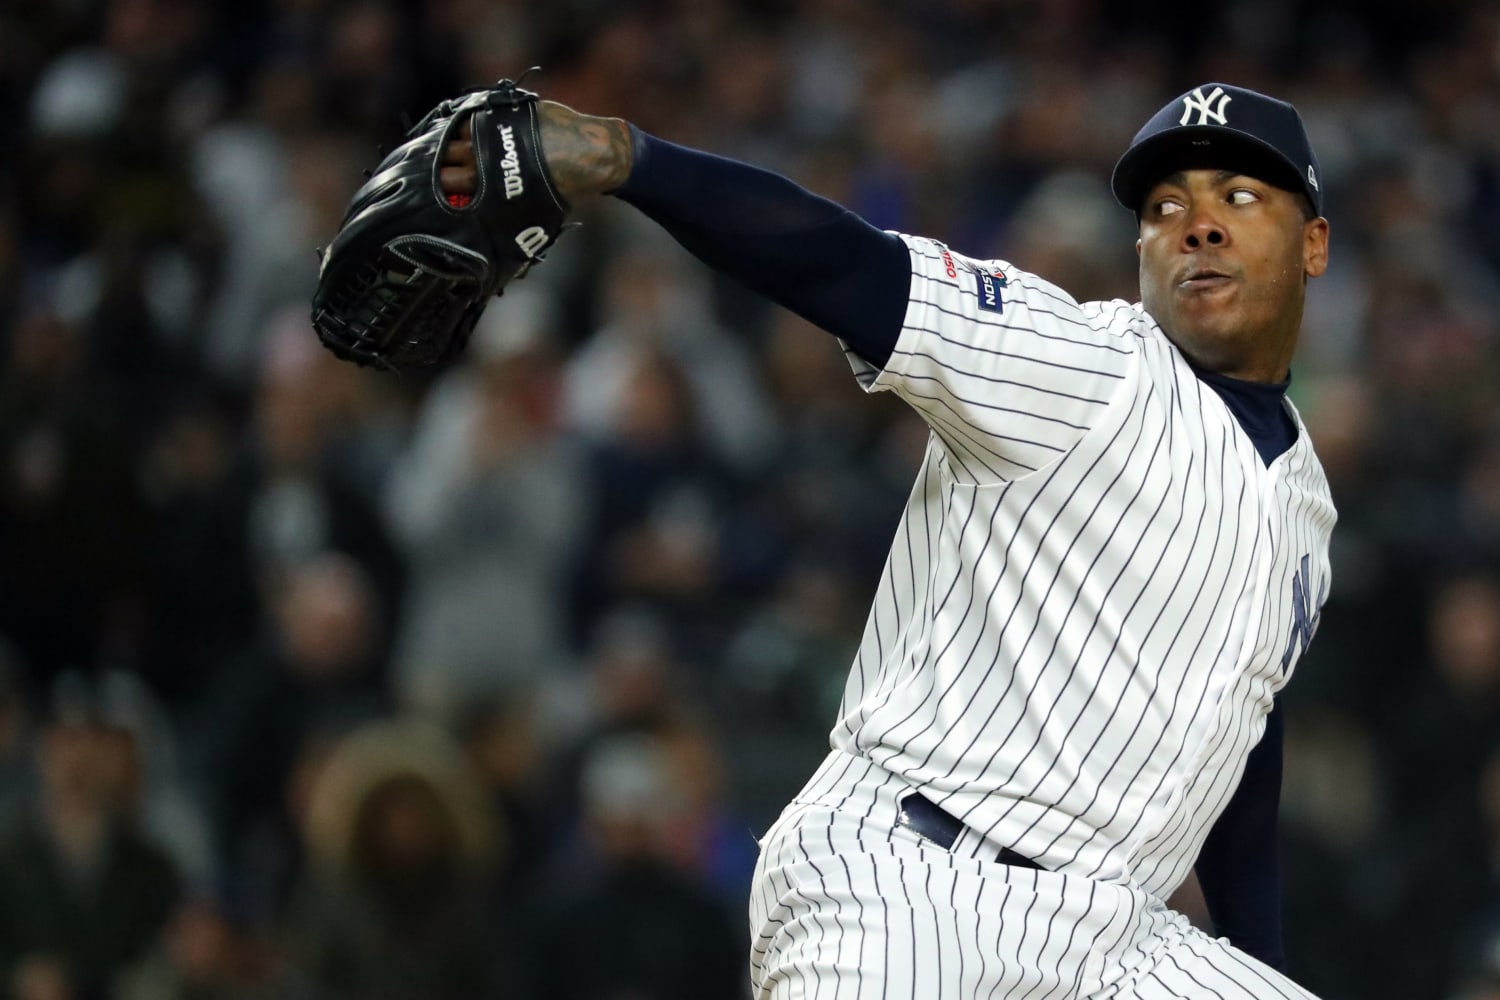 Yankees' closer Aroldis Chapman tests positive for coronavirus, out for 'foreseeable future'